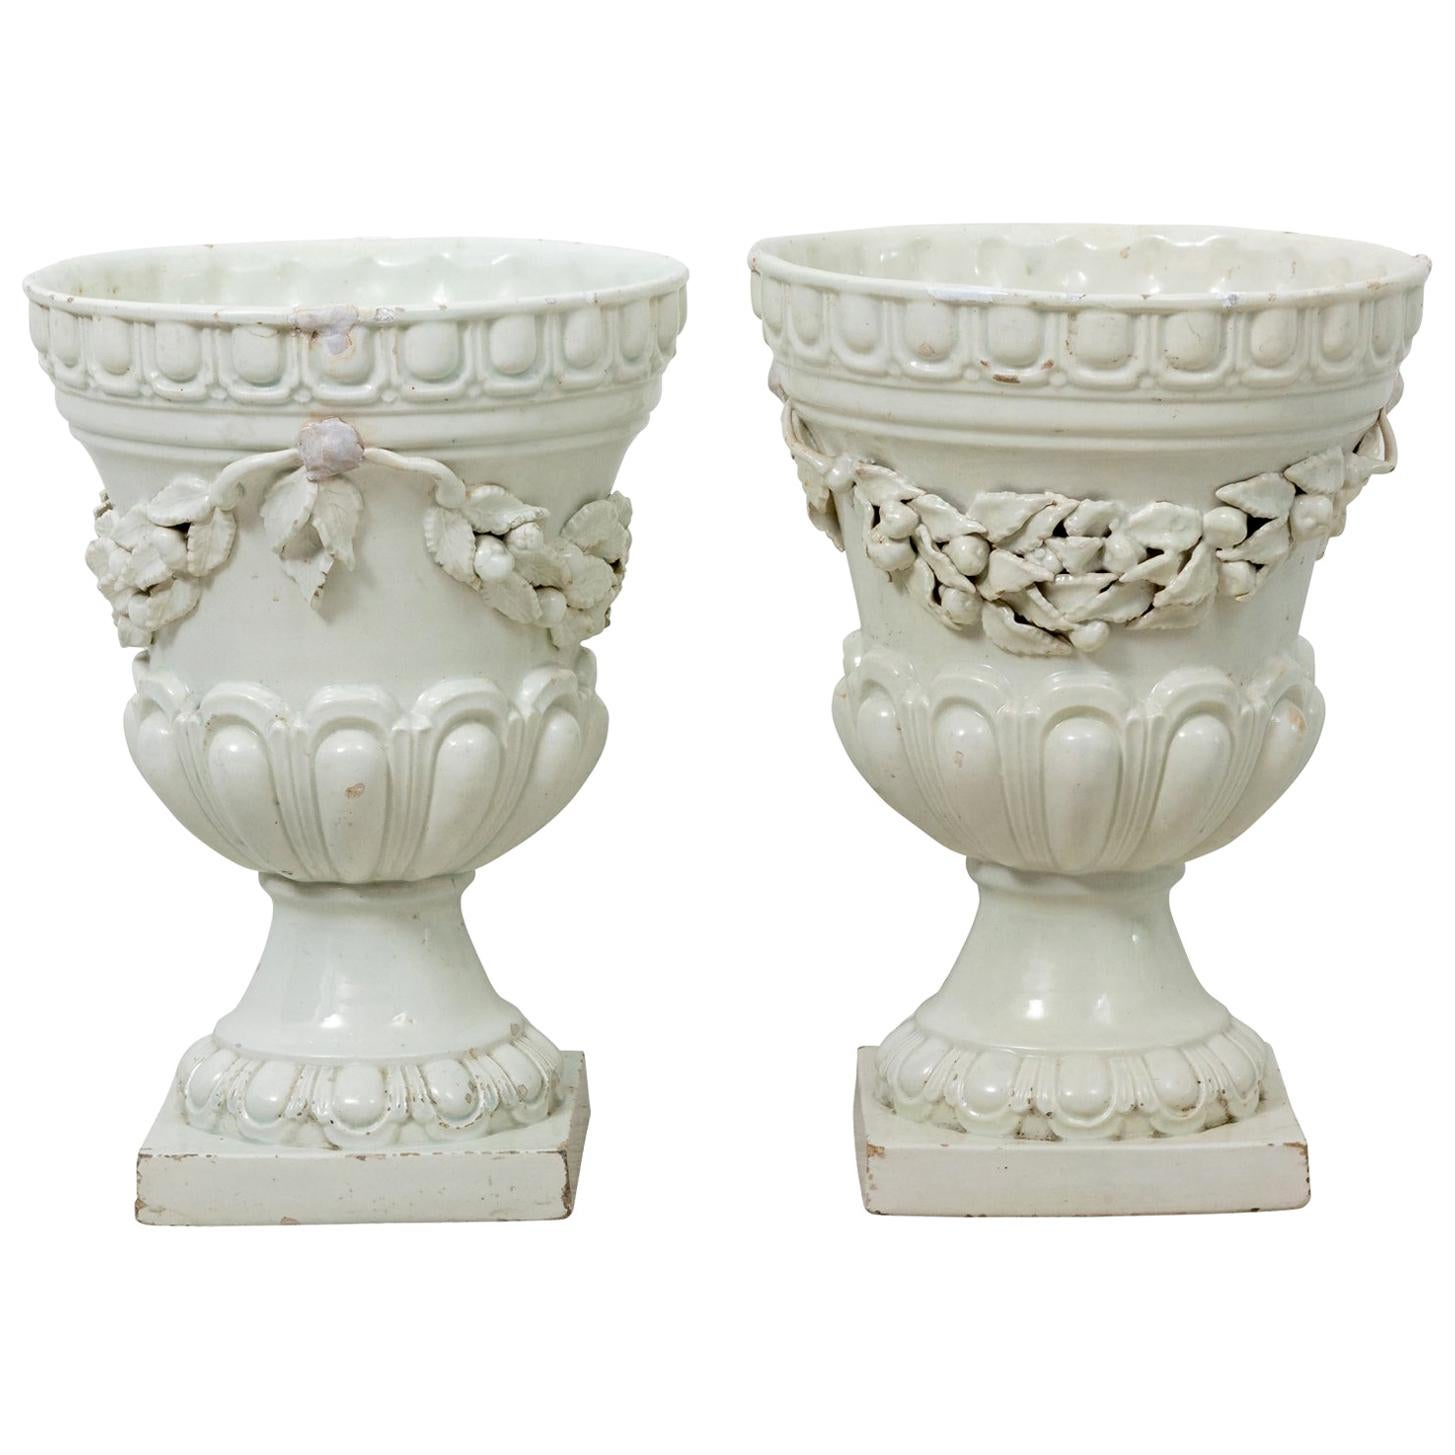 Pair of White Neoclassiclal Style Urns